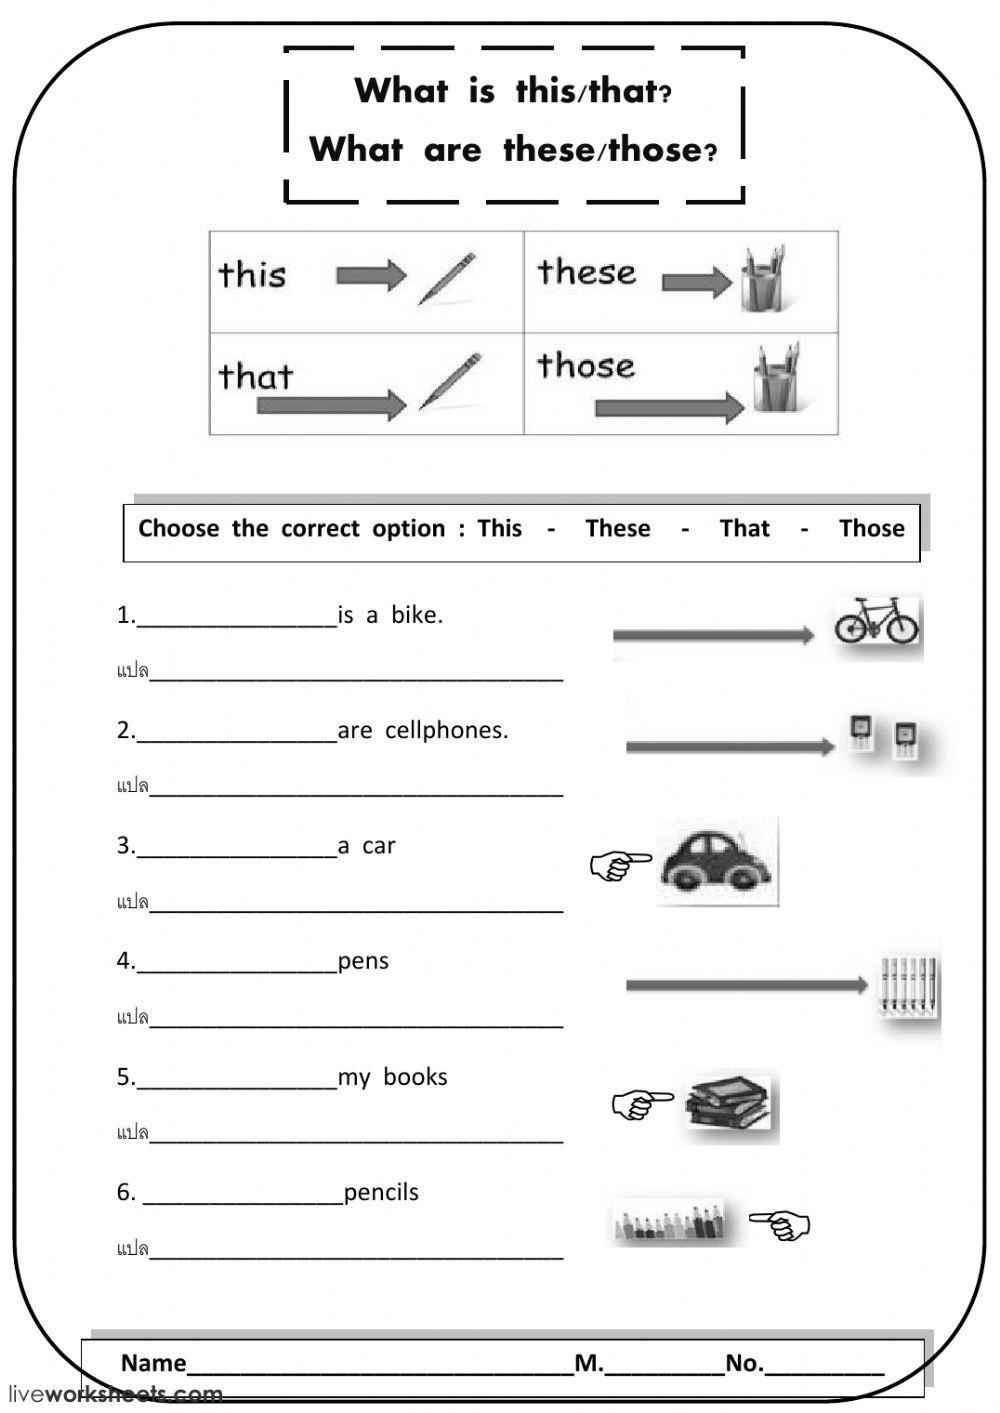 this-these-that-those-worksheet-live-worksheets